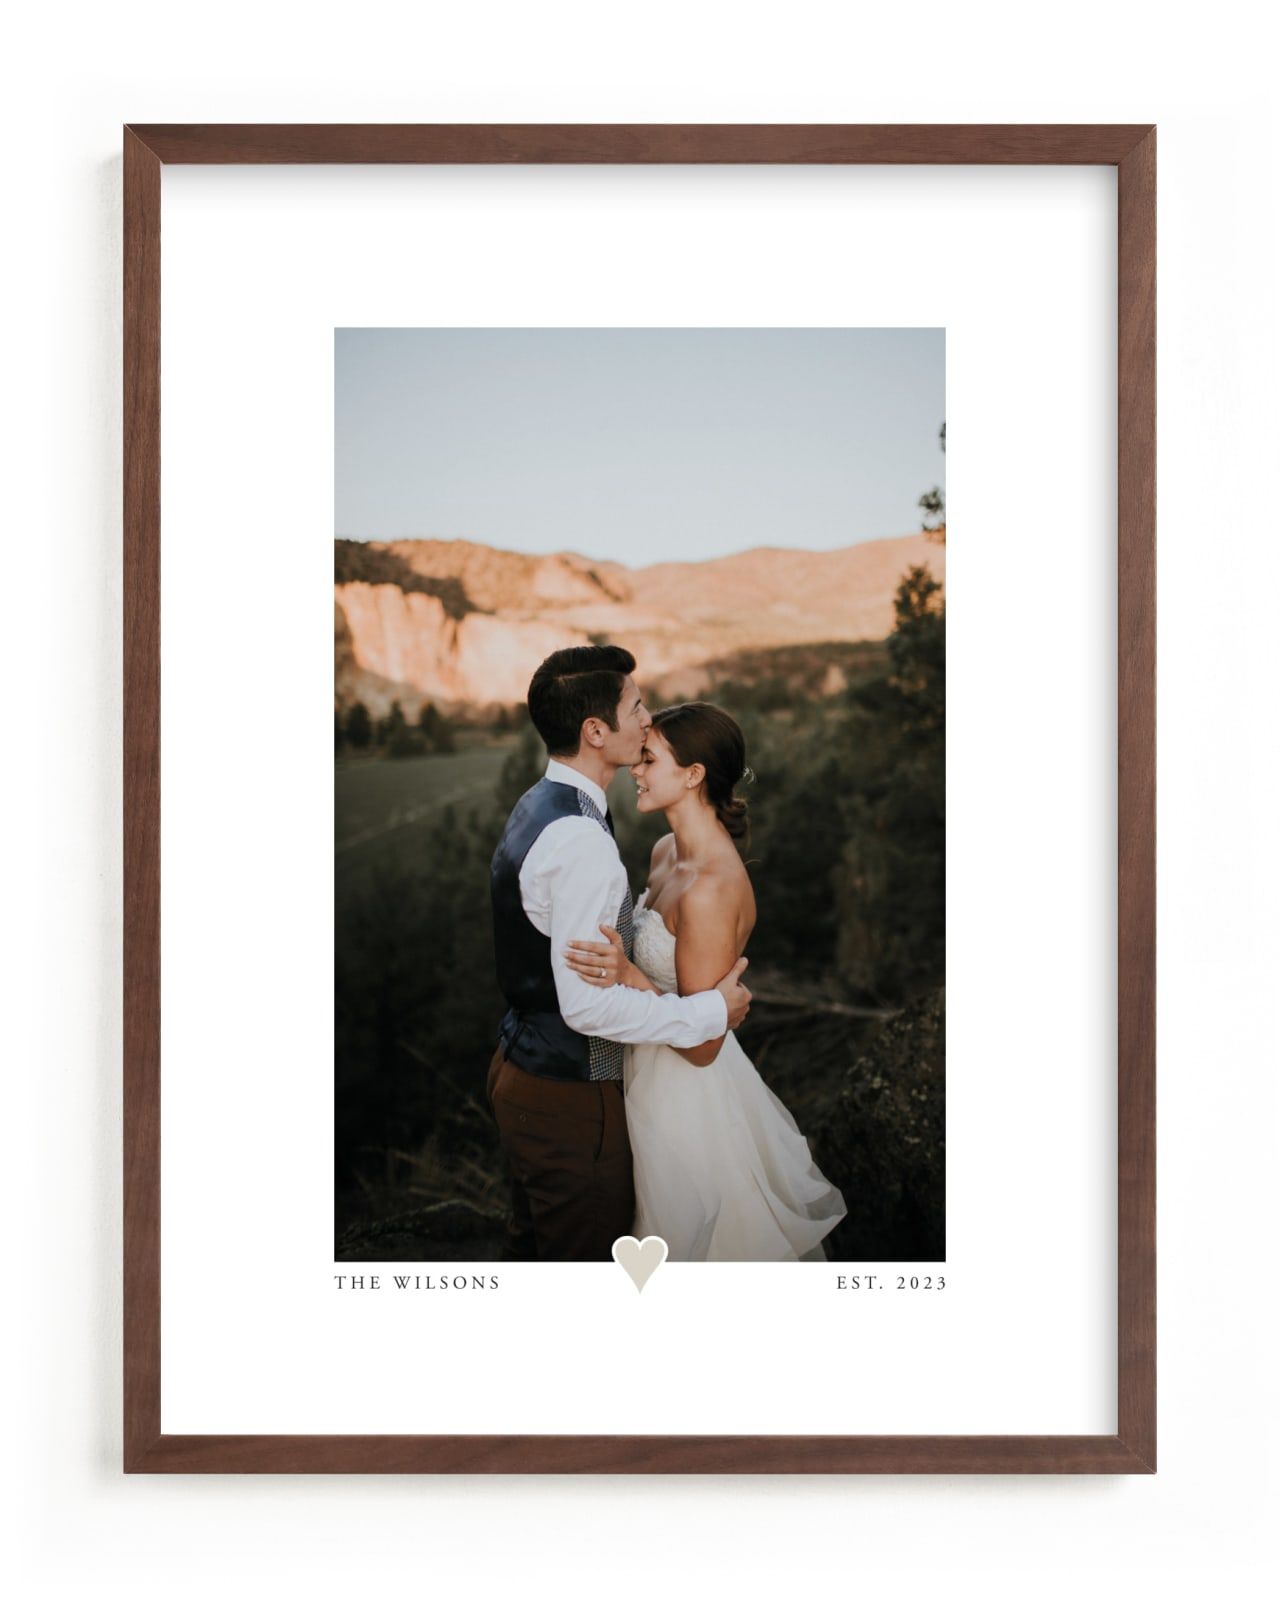 With a Heart - Portrait | Minted